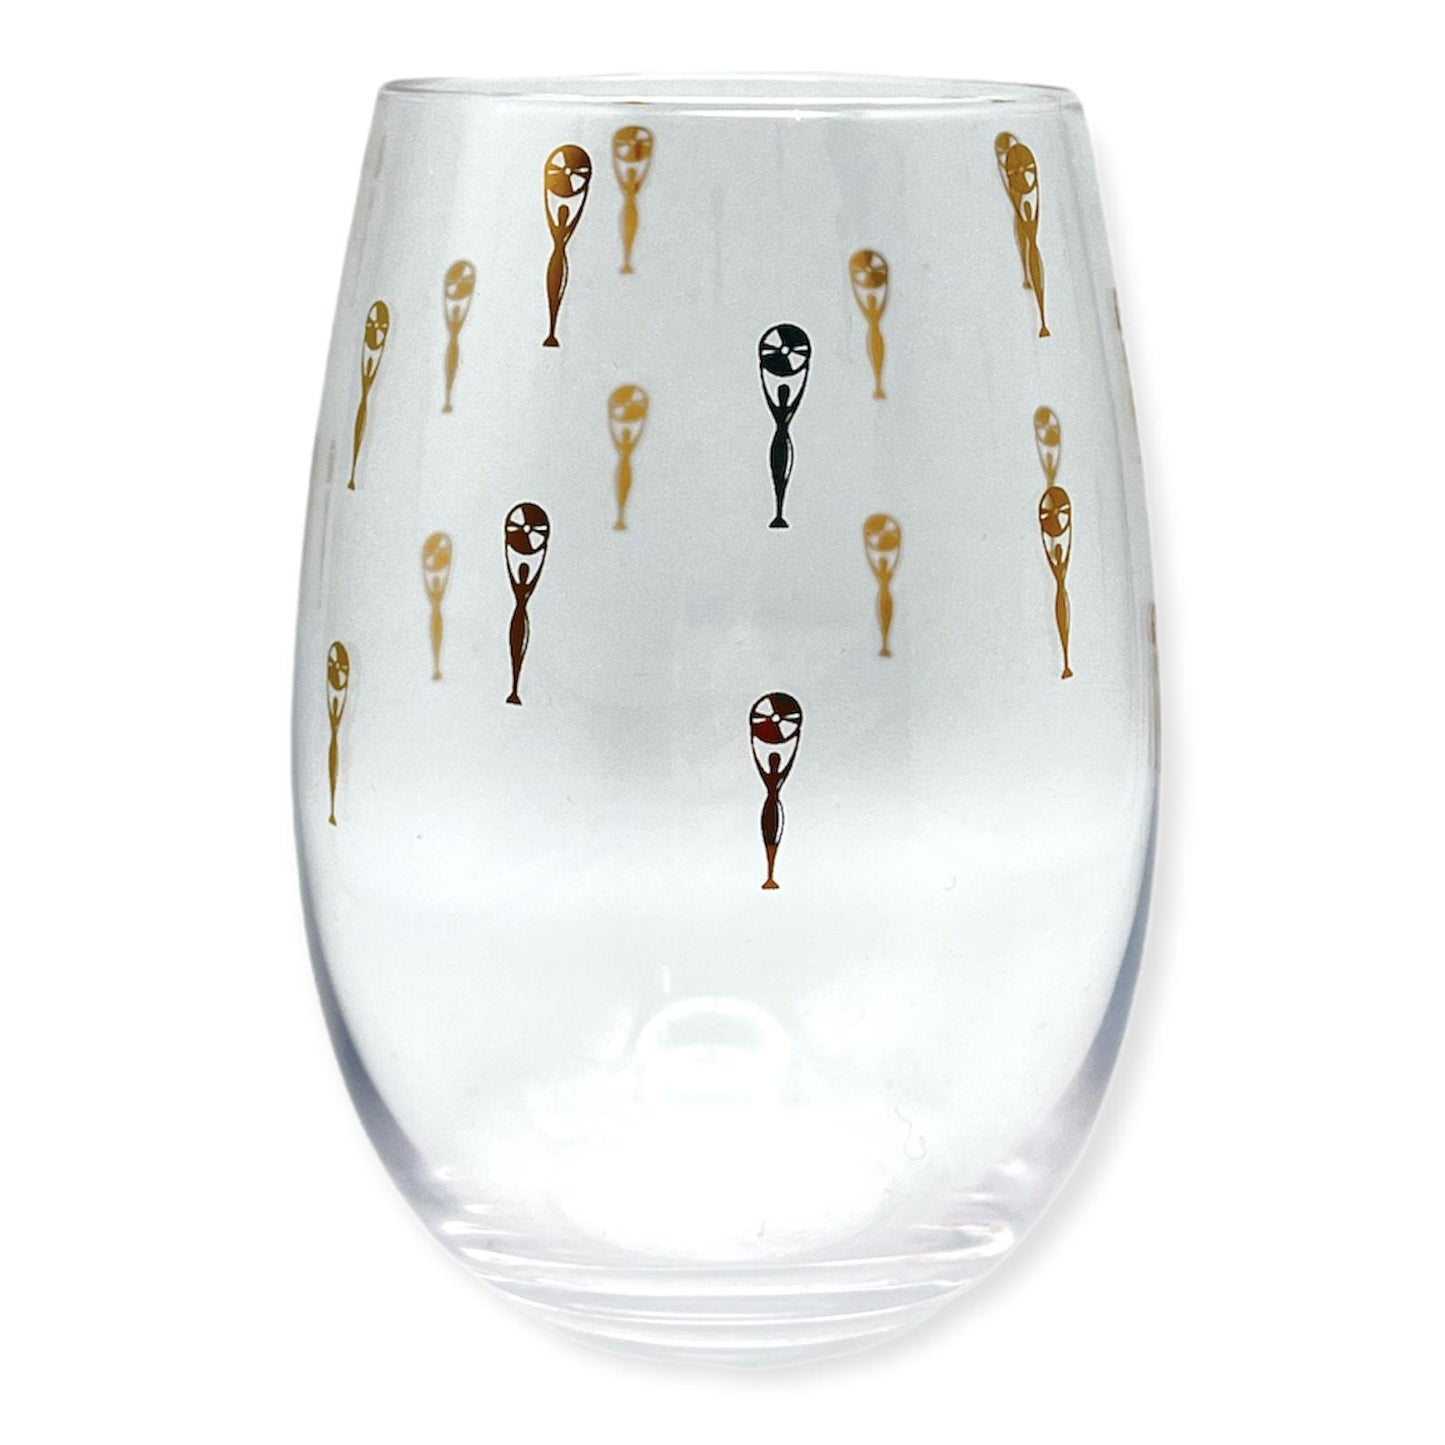 ROCK HALL GOLD COLLECTION - STEMLESS WINE GLASS